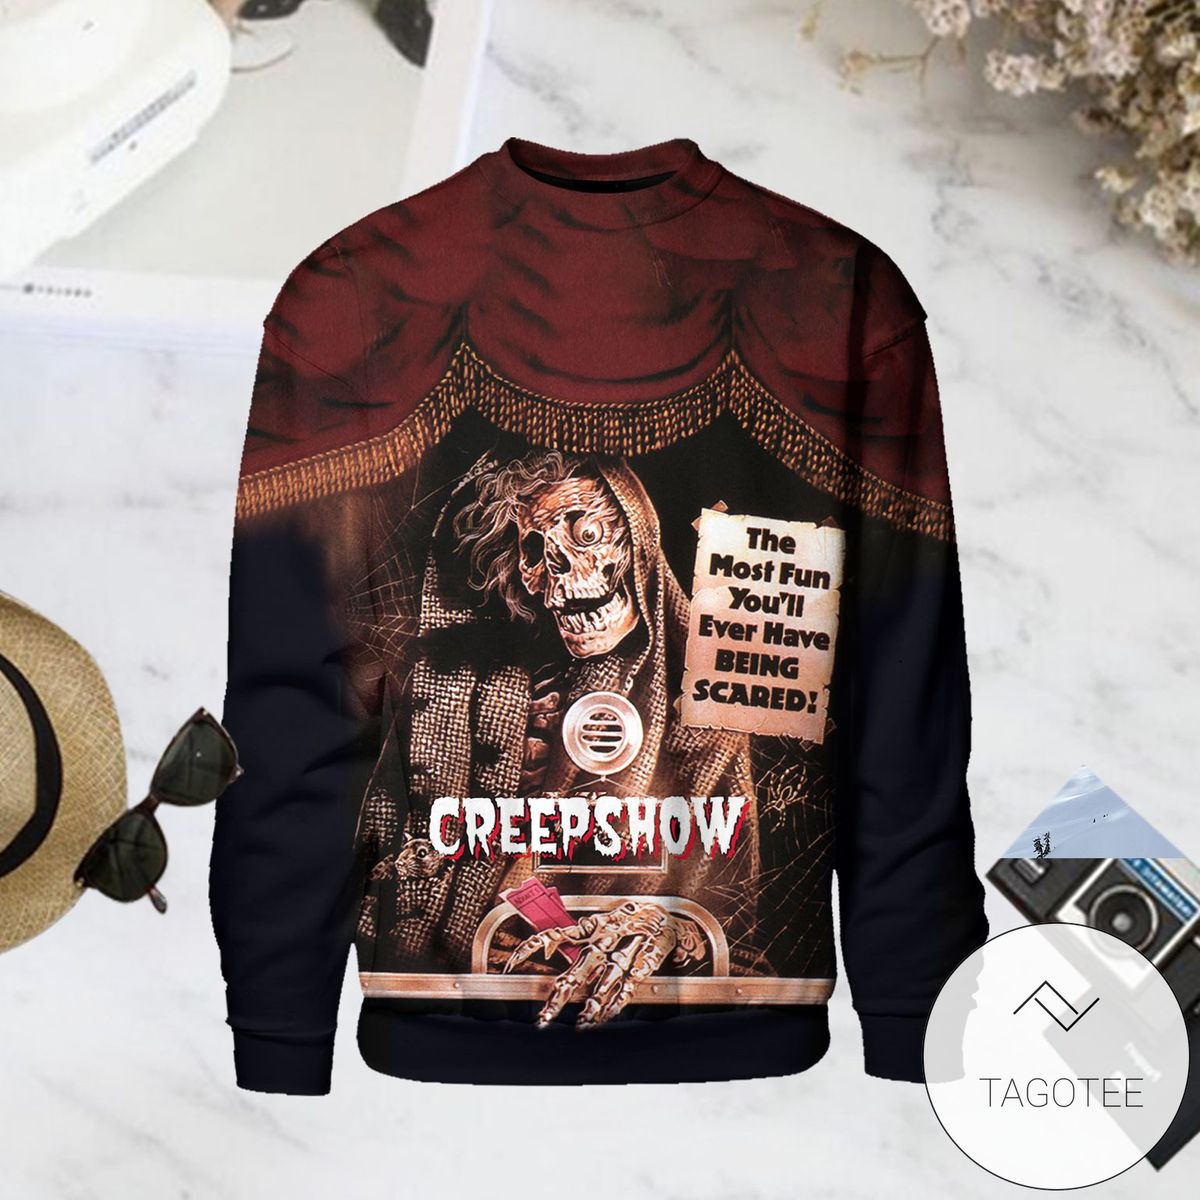 Creepshow The Most Fun You'll Ever Have Being Scared Sweatshirt